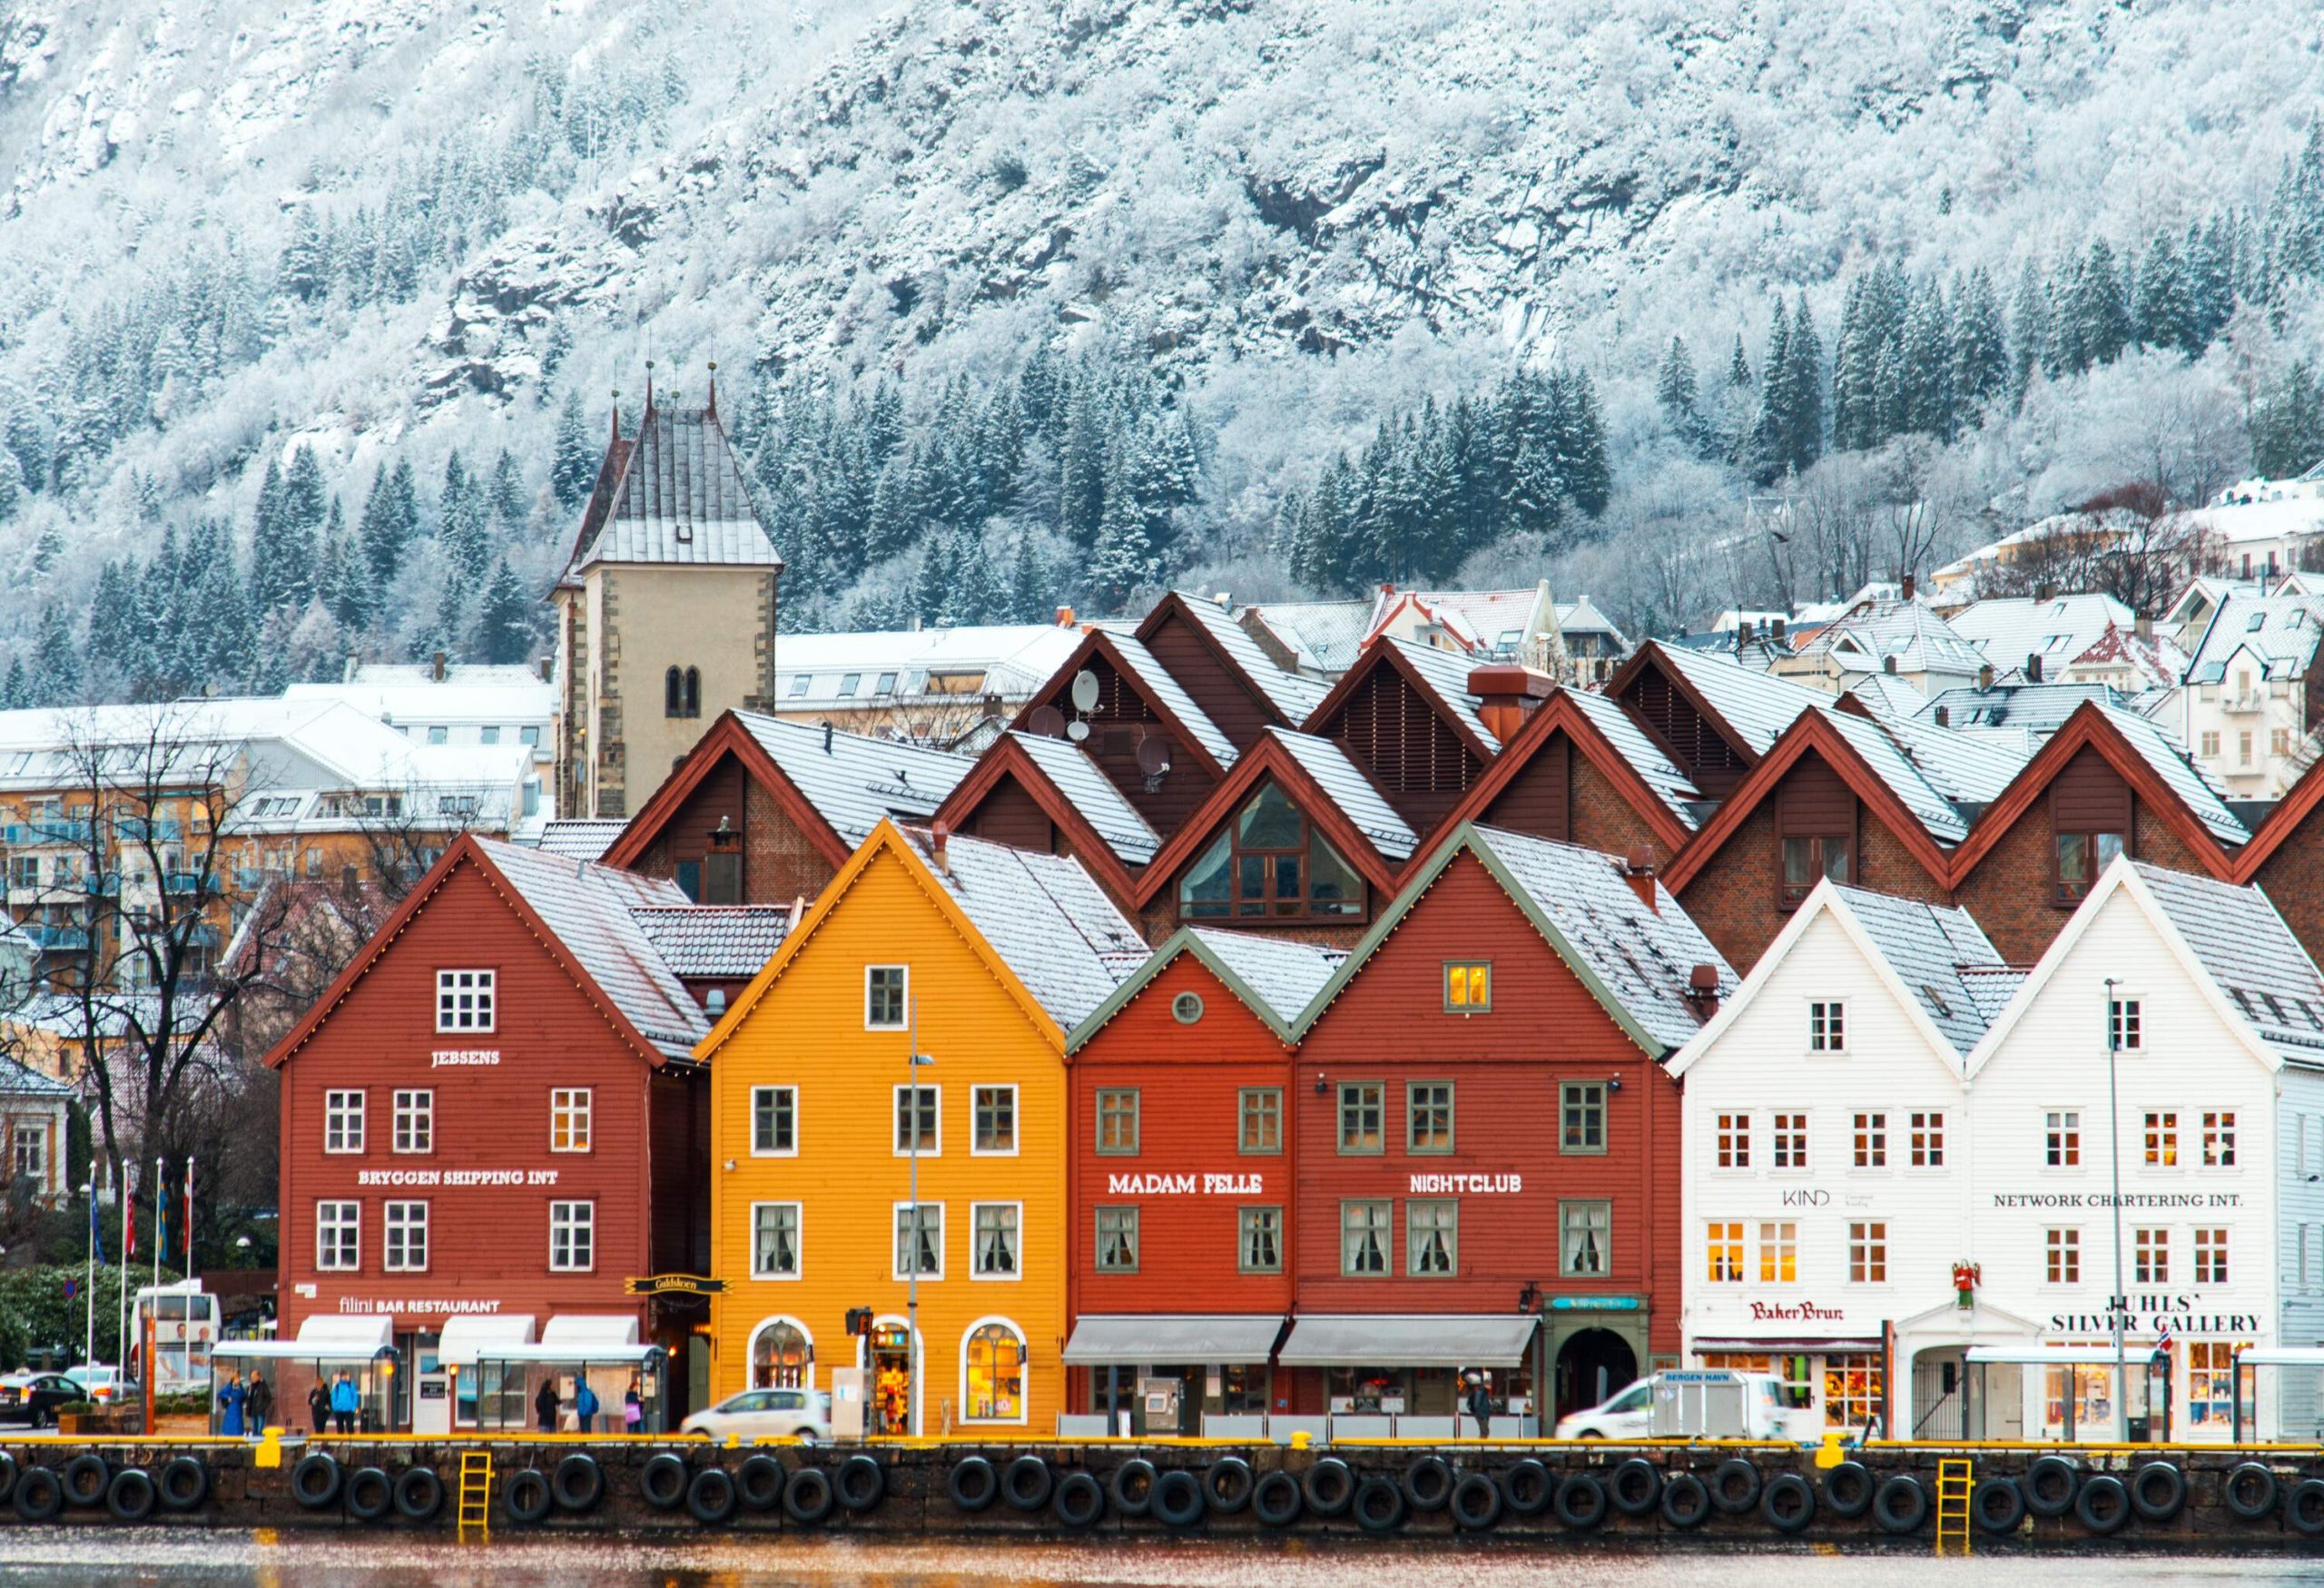 Bryggen's lovely waterfront neighbourhood, with vibrant houses set against snow-covered mountains and frosted trees.